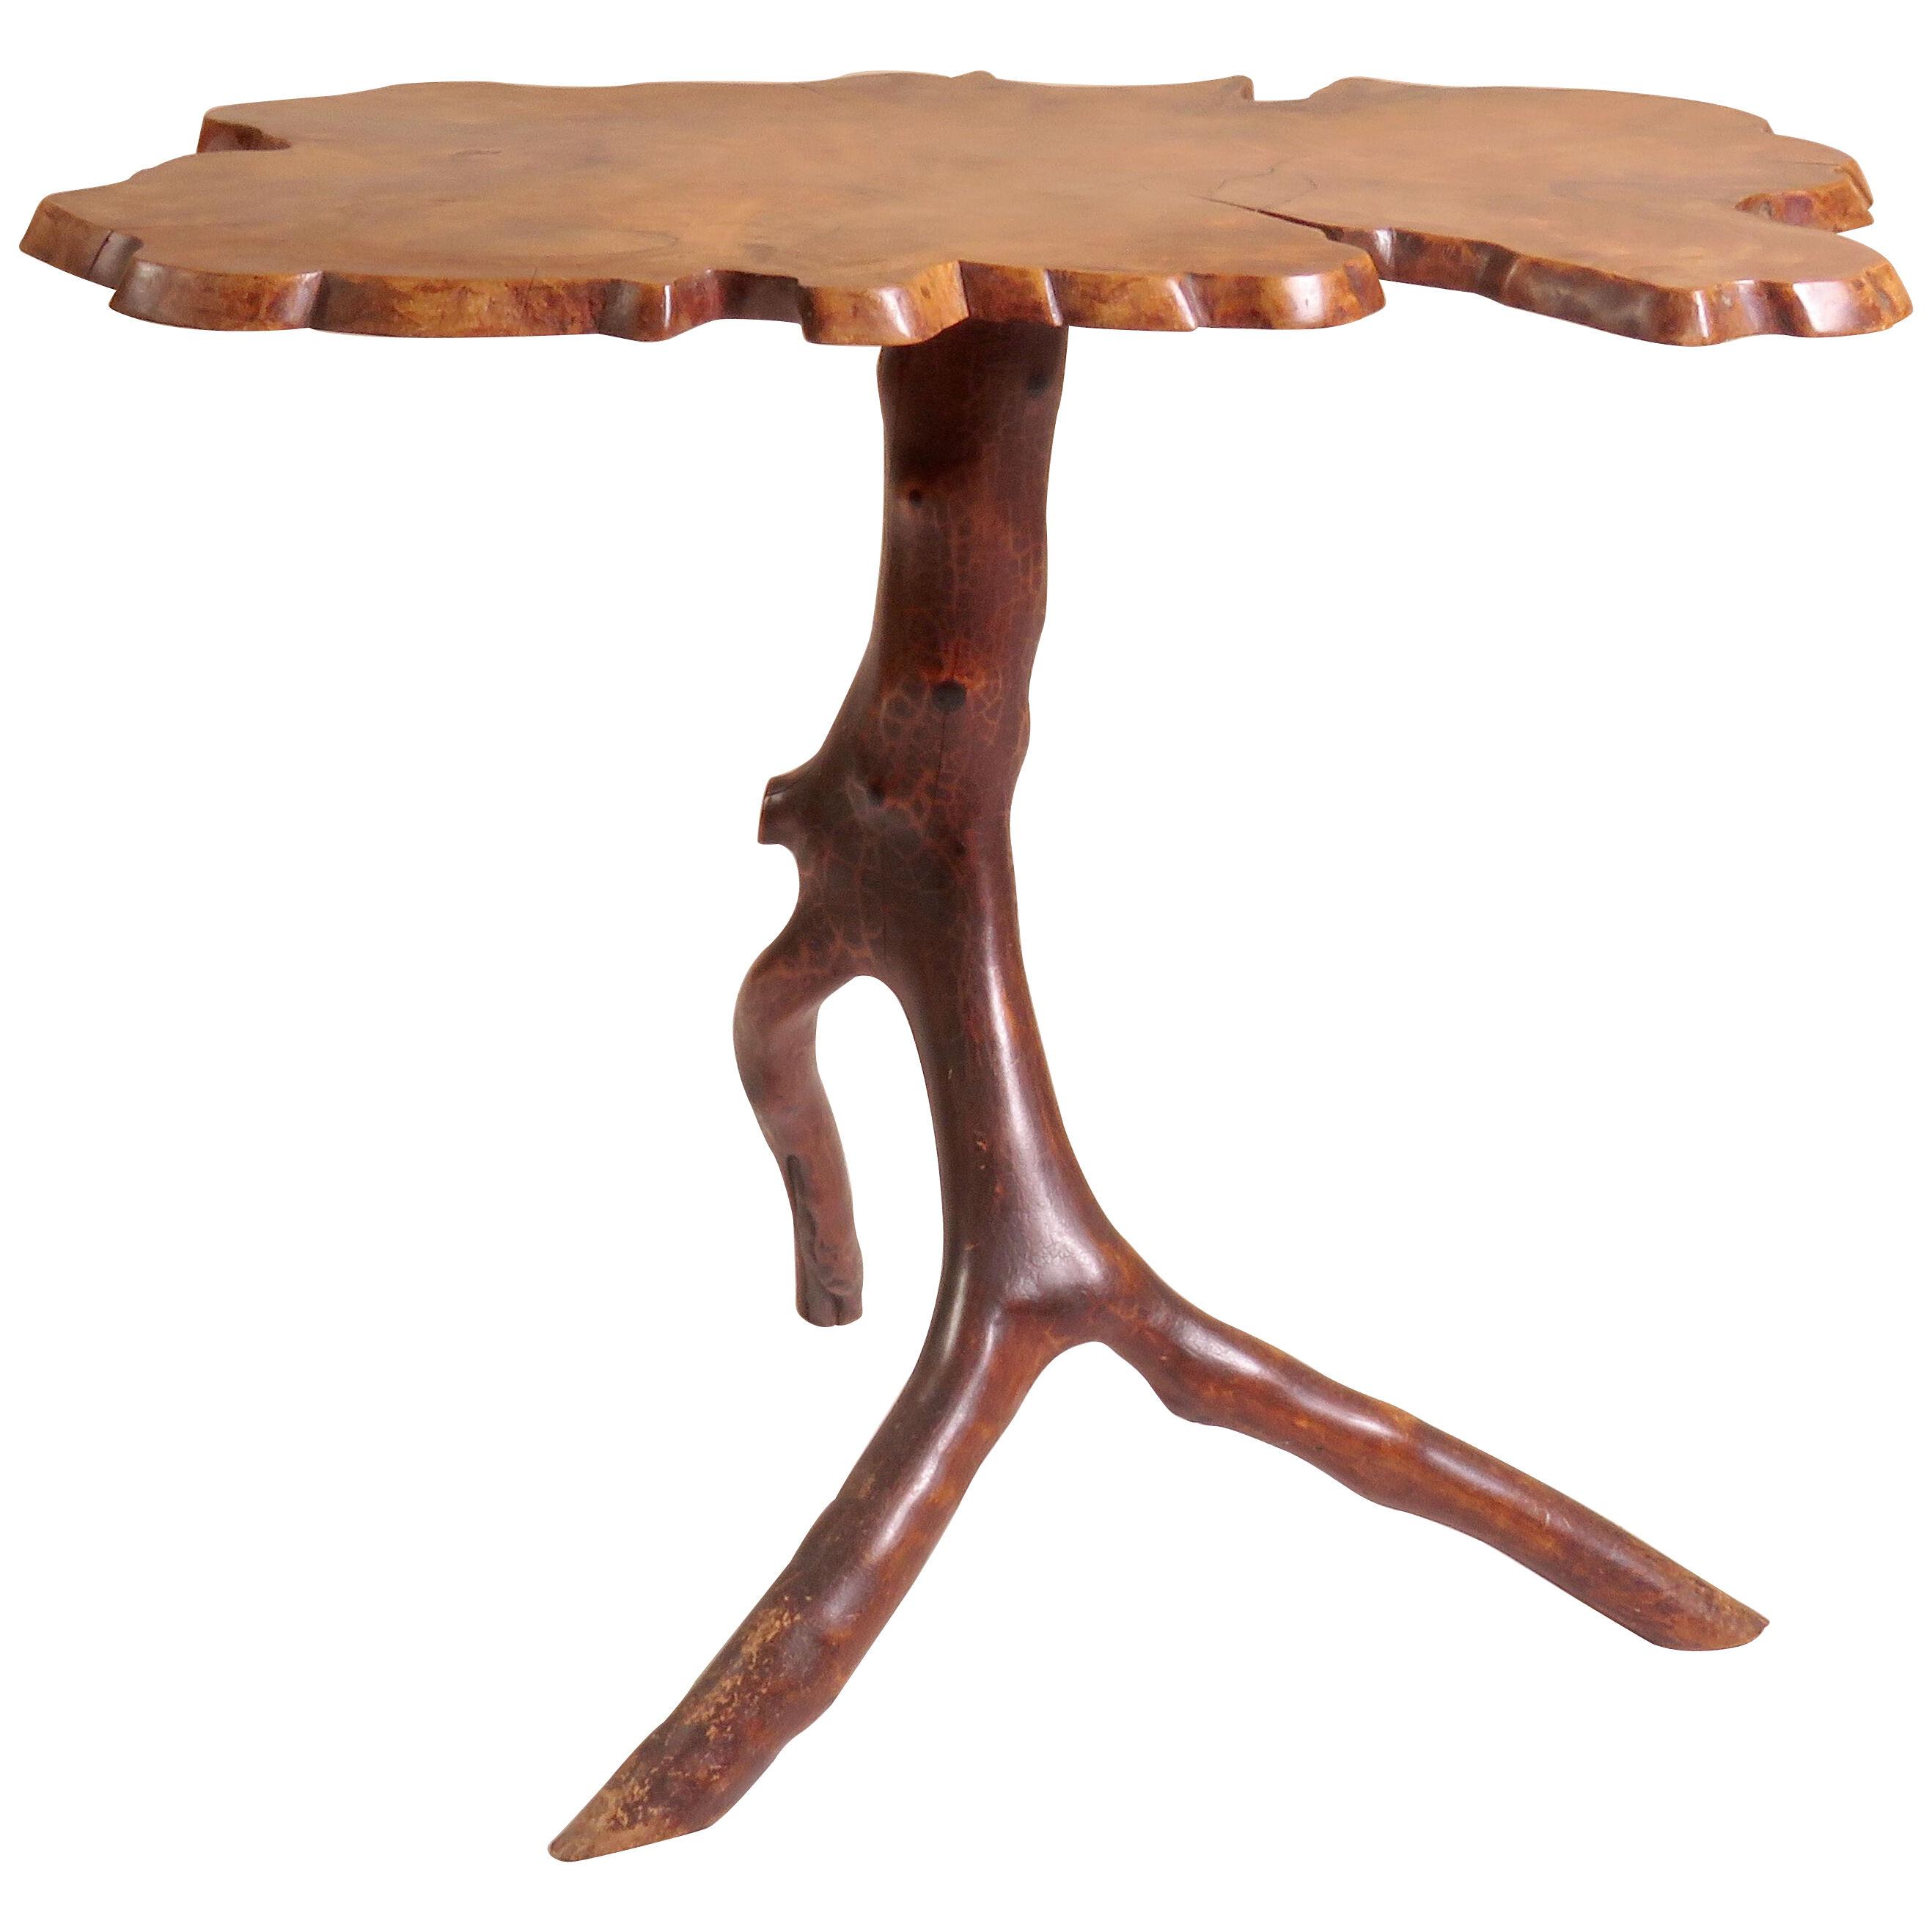 Early 20th Century Yew Wood "Branch" Table